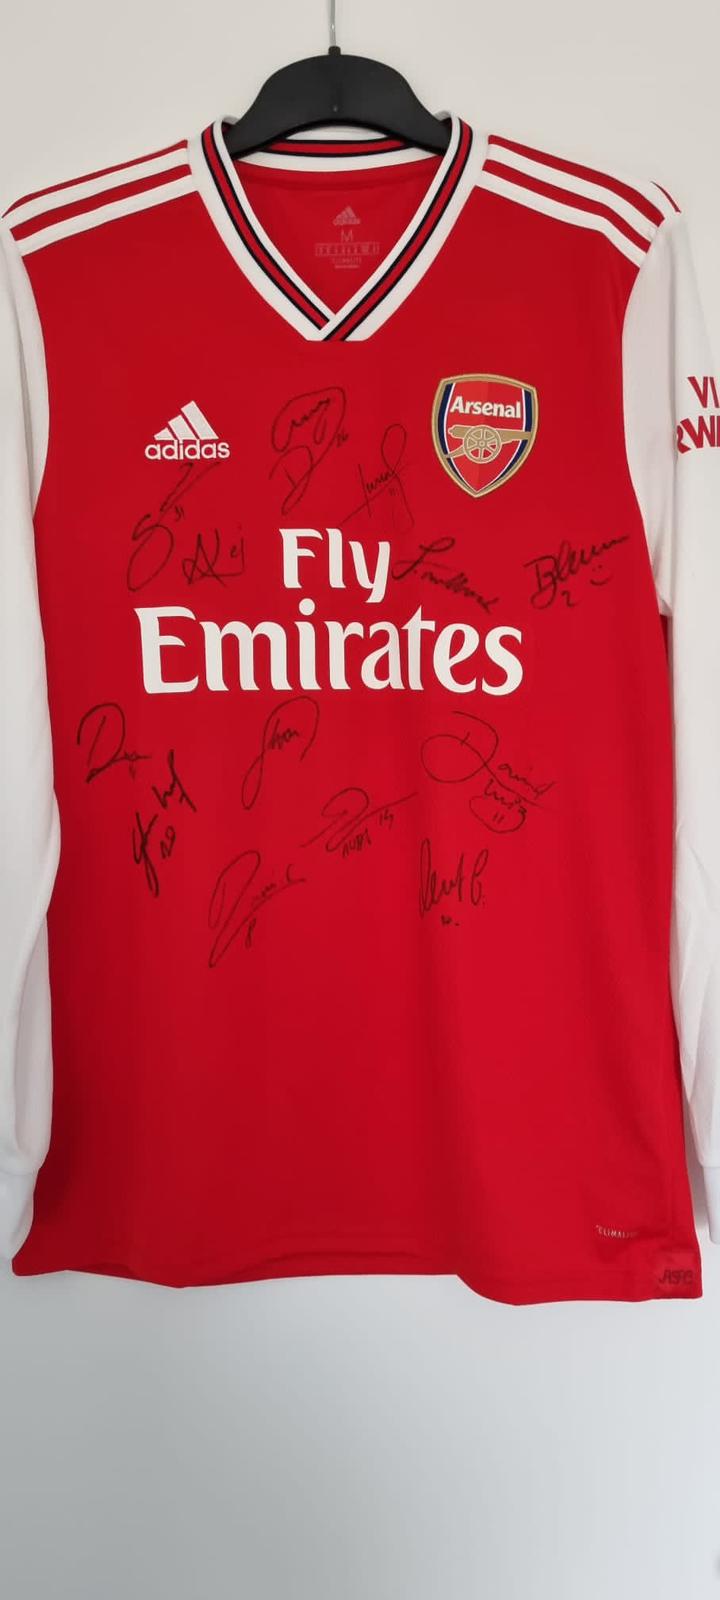 An Arsenal shirt signed by the men’s first team gifted to Mr Cain wishing him a good recovery